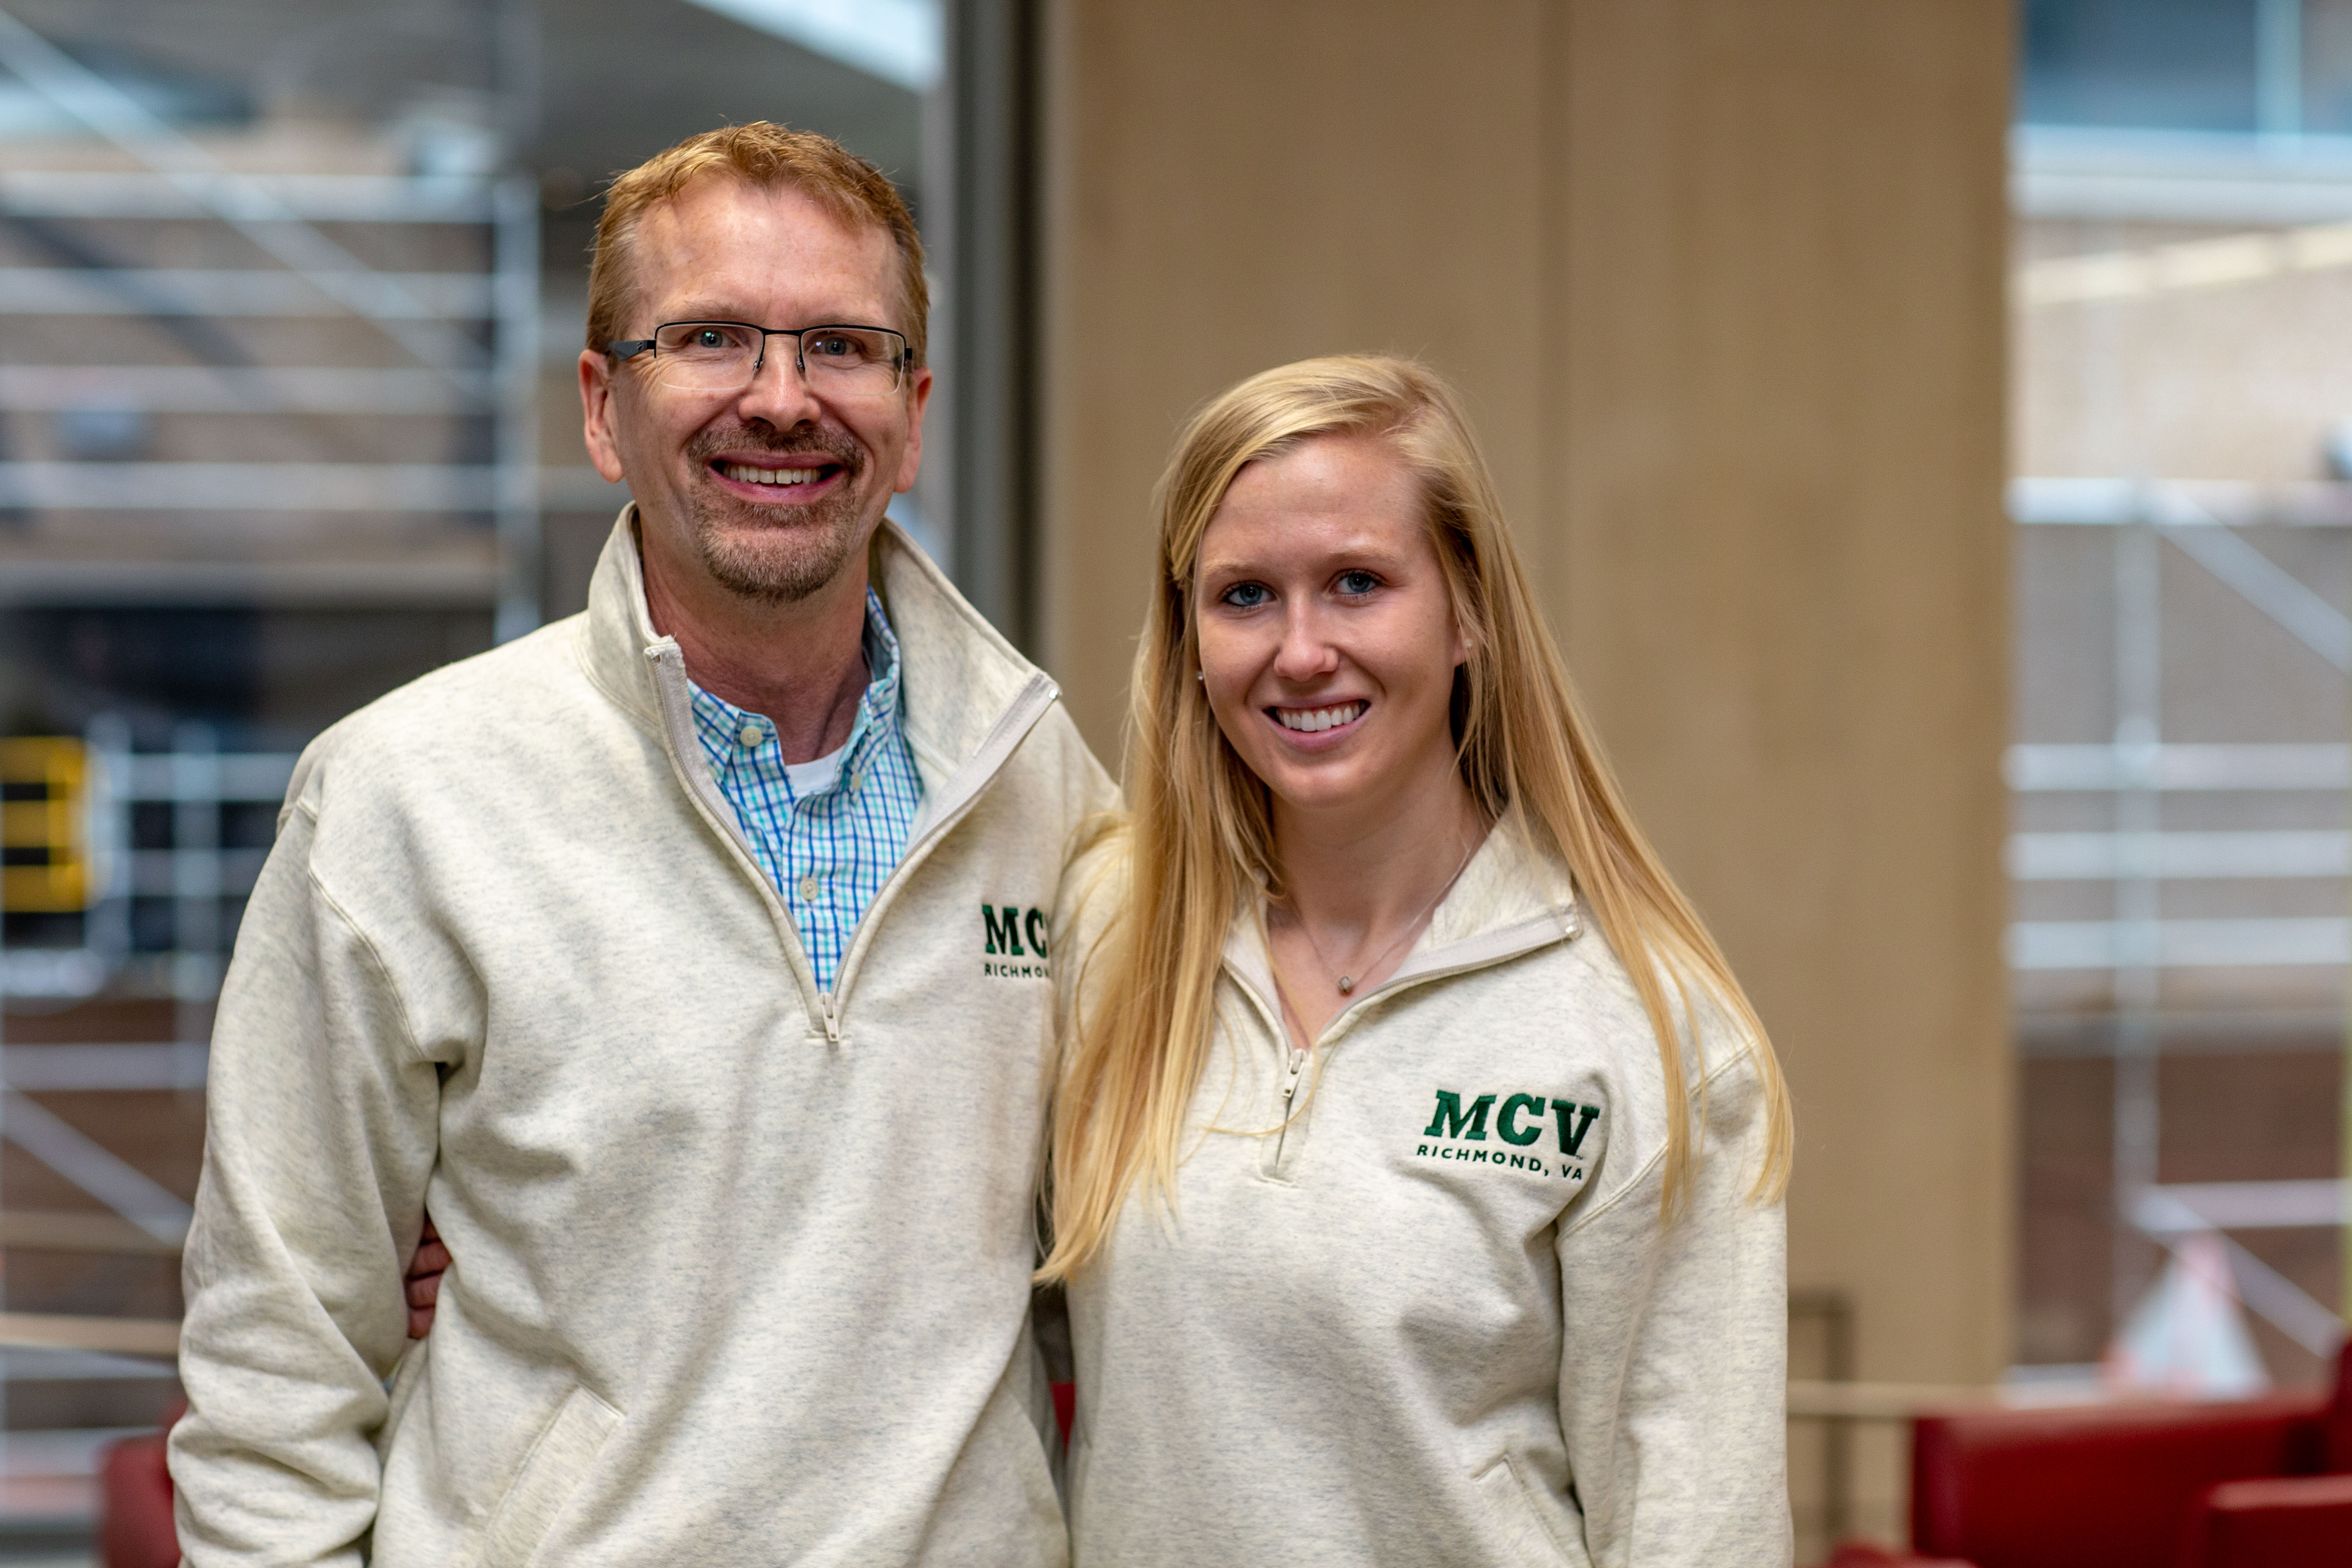 The Class of 1989’s Timothy A. Powell with his daughter, the Class of 2021’s Lauren Powell